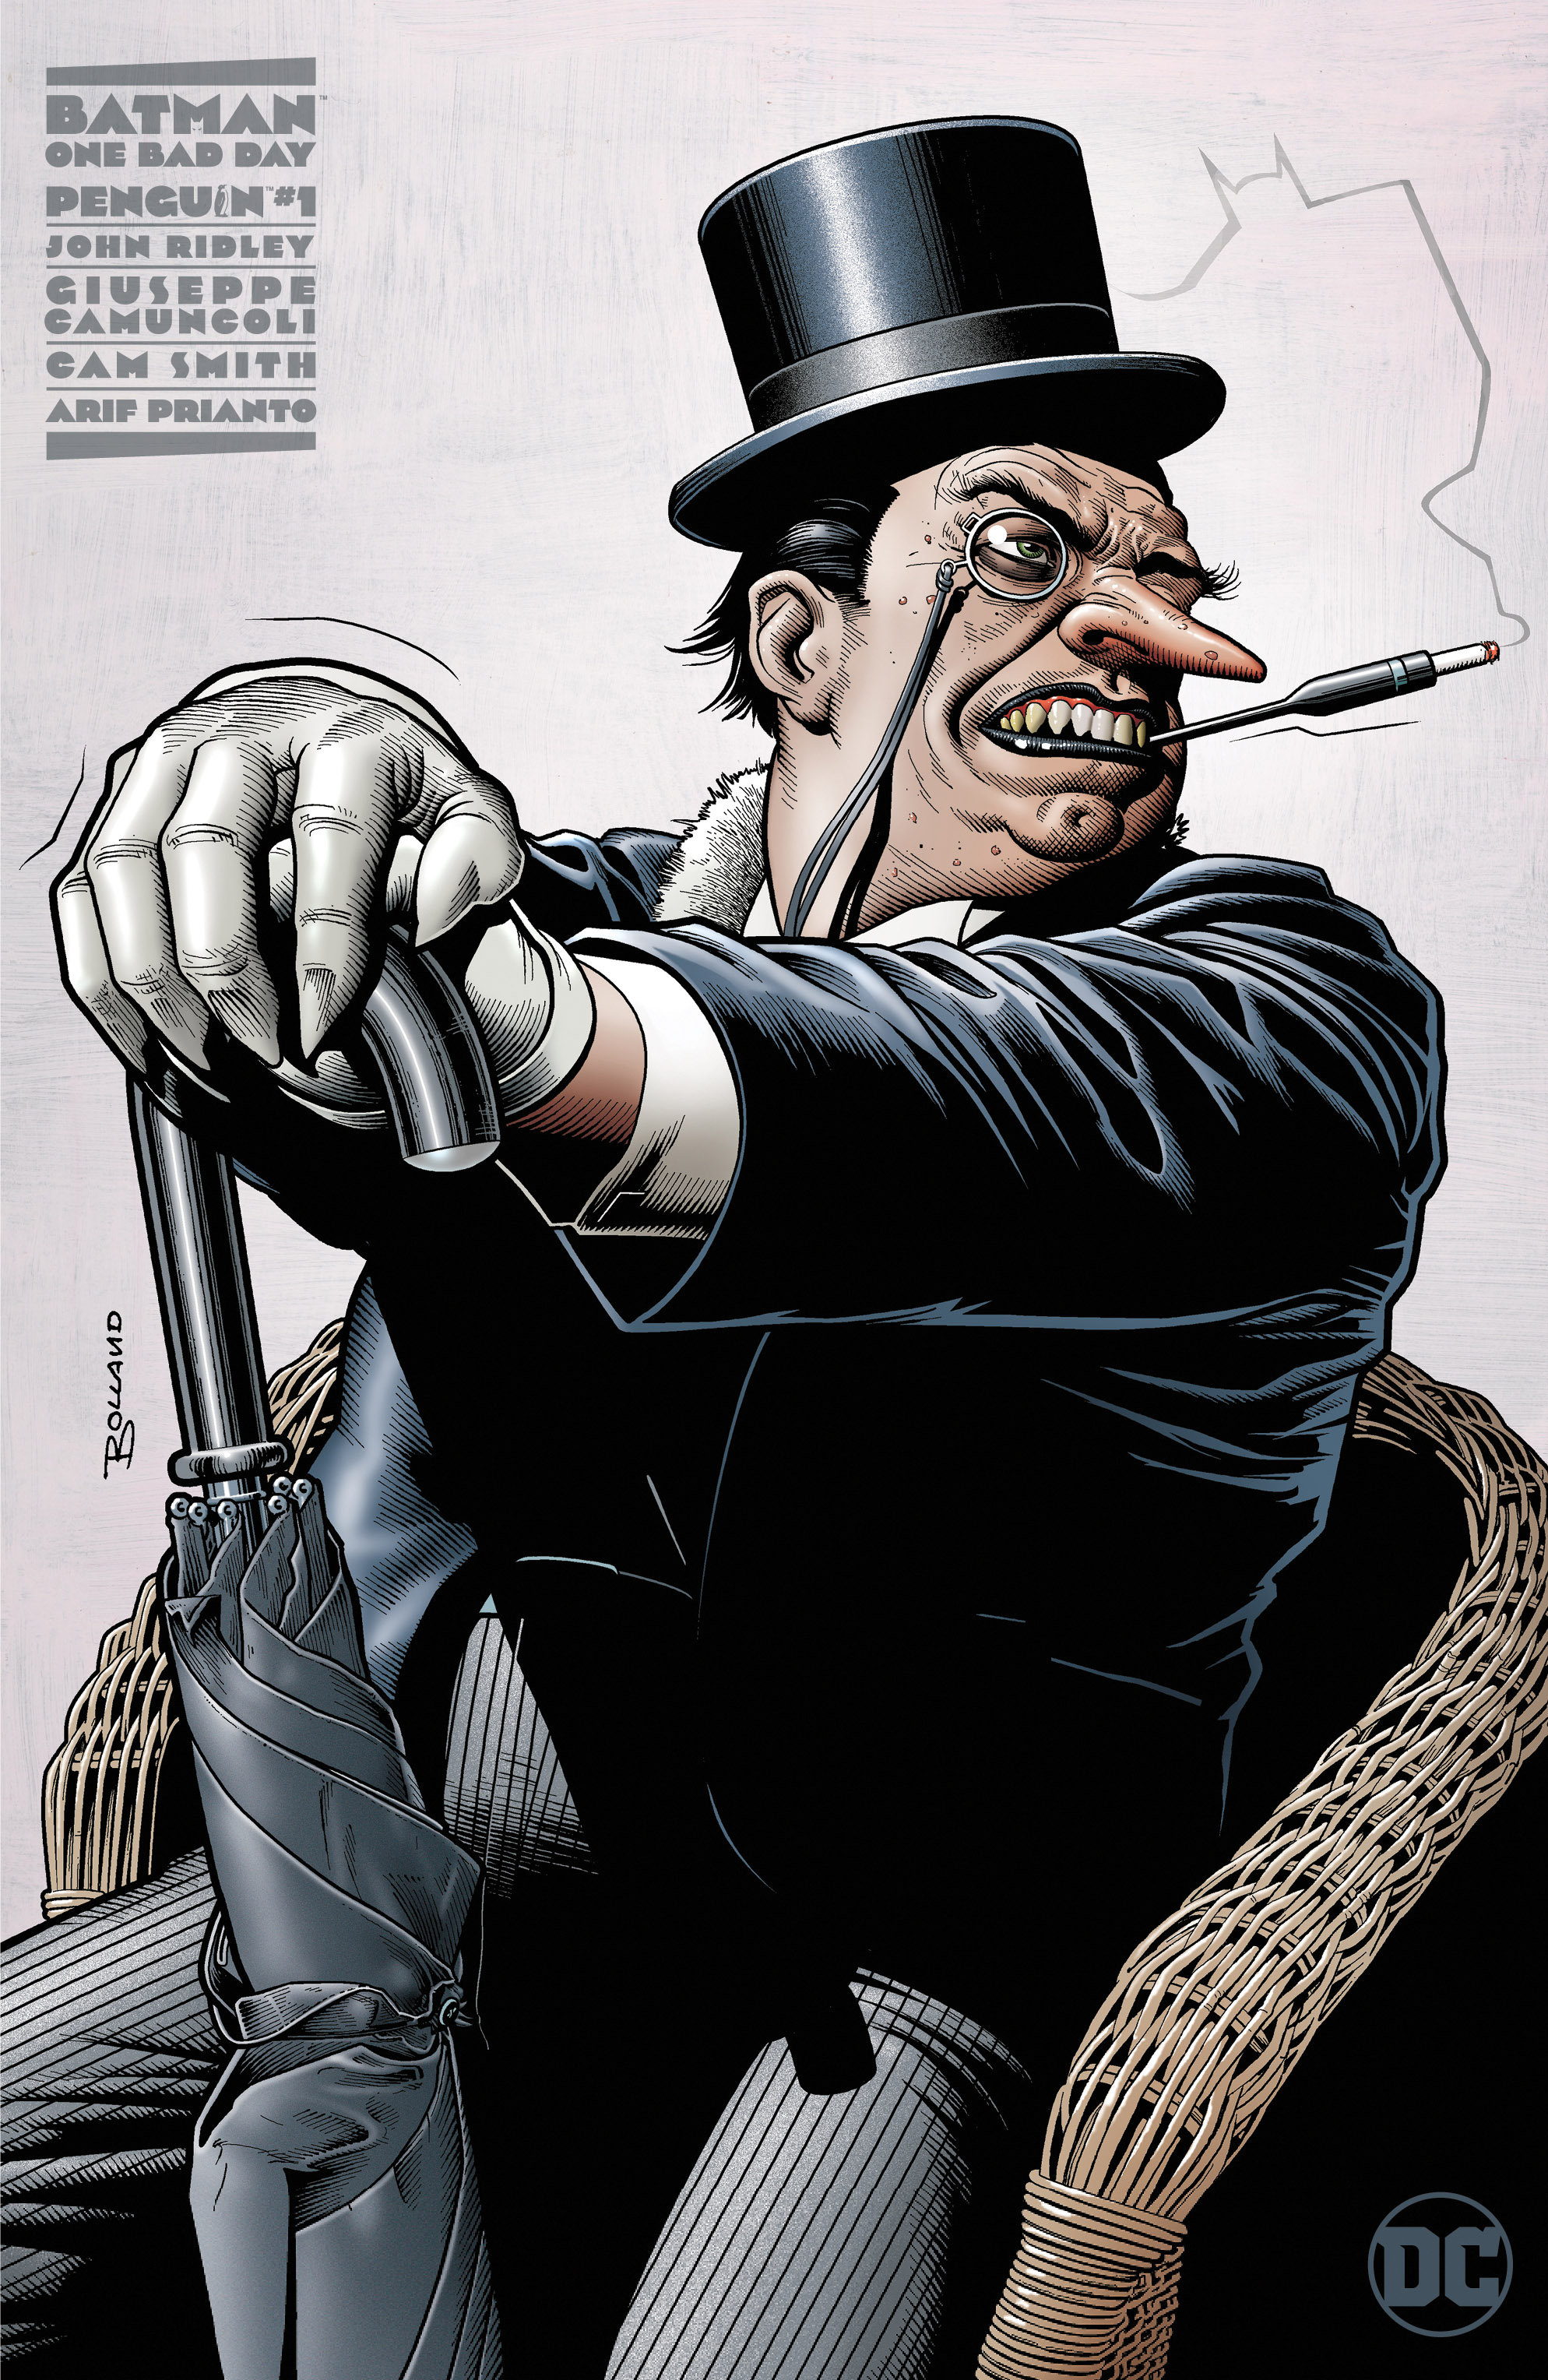 Batman One Bad Day Penguin #1 (One Shot) Cover E 1 for 100 Incentive Brian  Bolland Variant | ComicHub